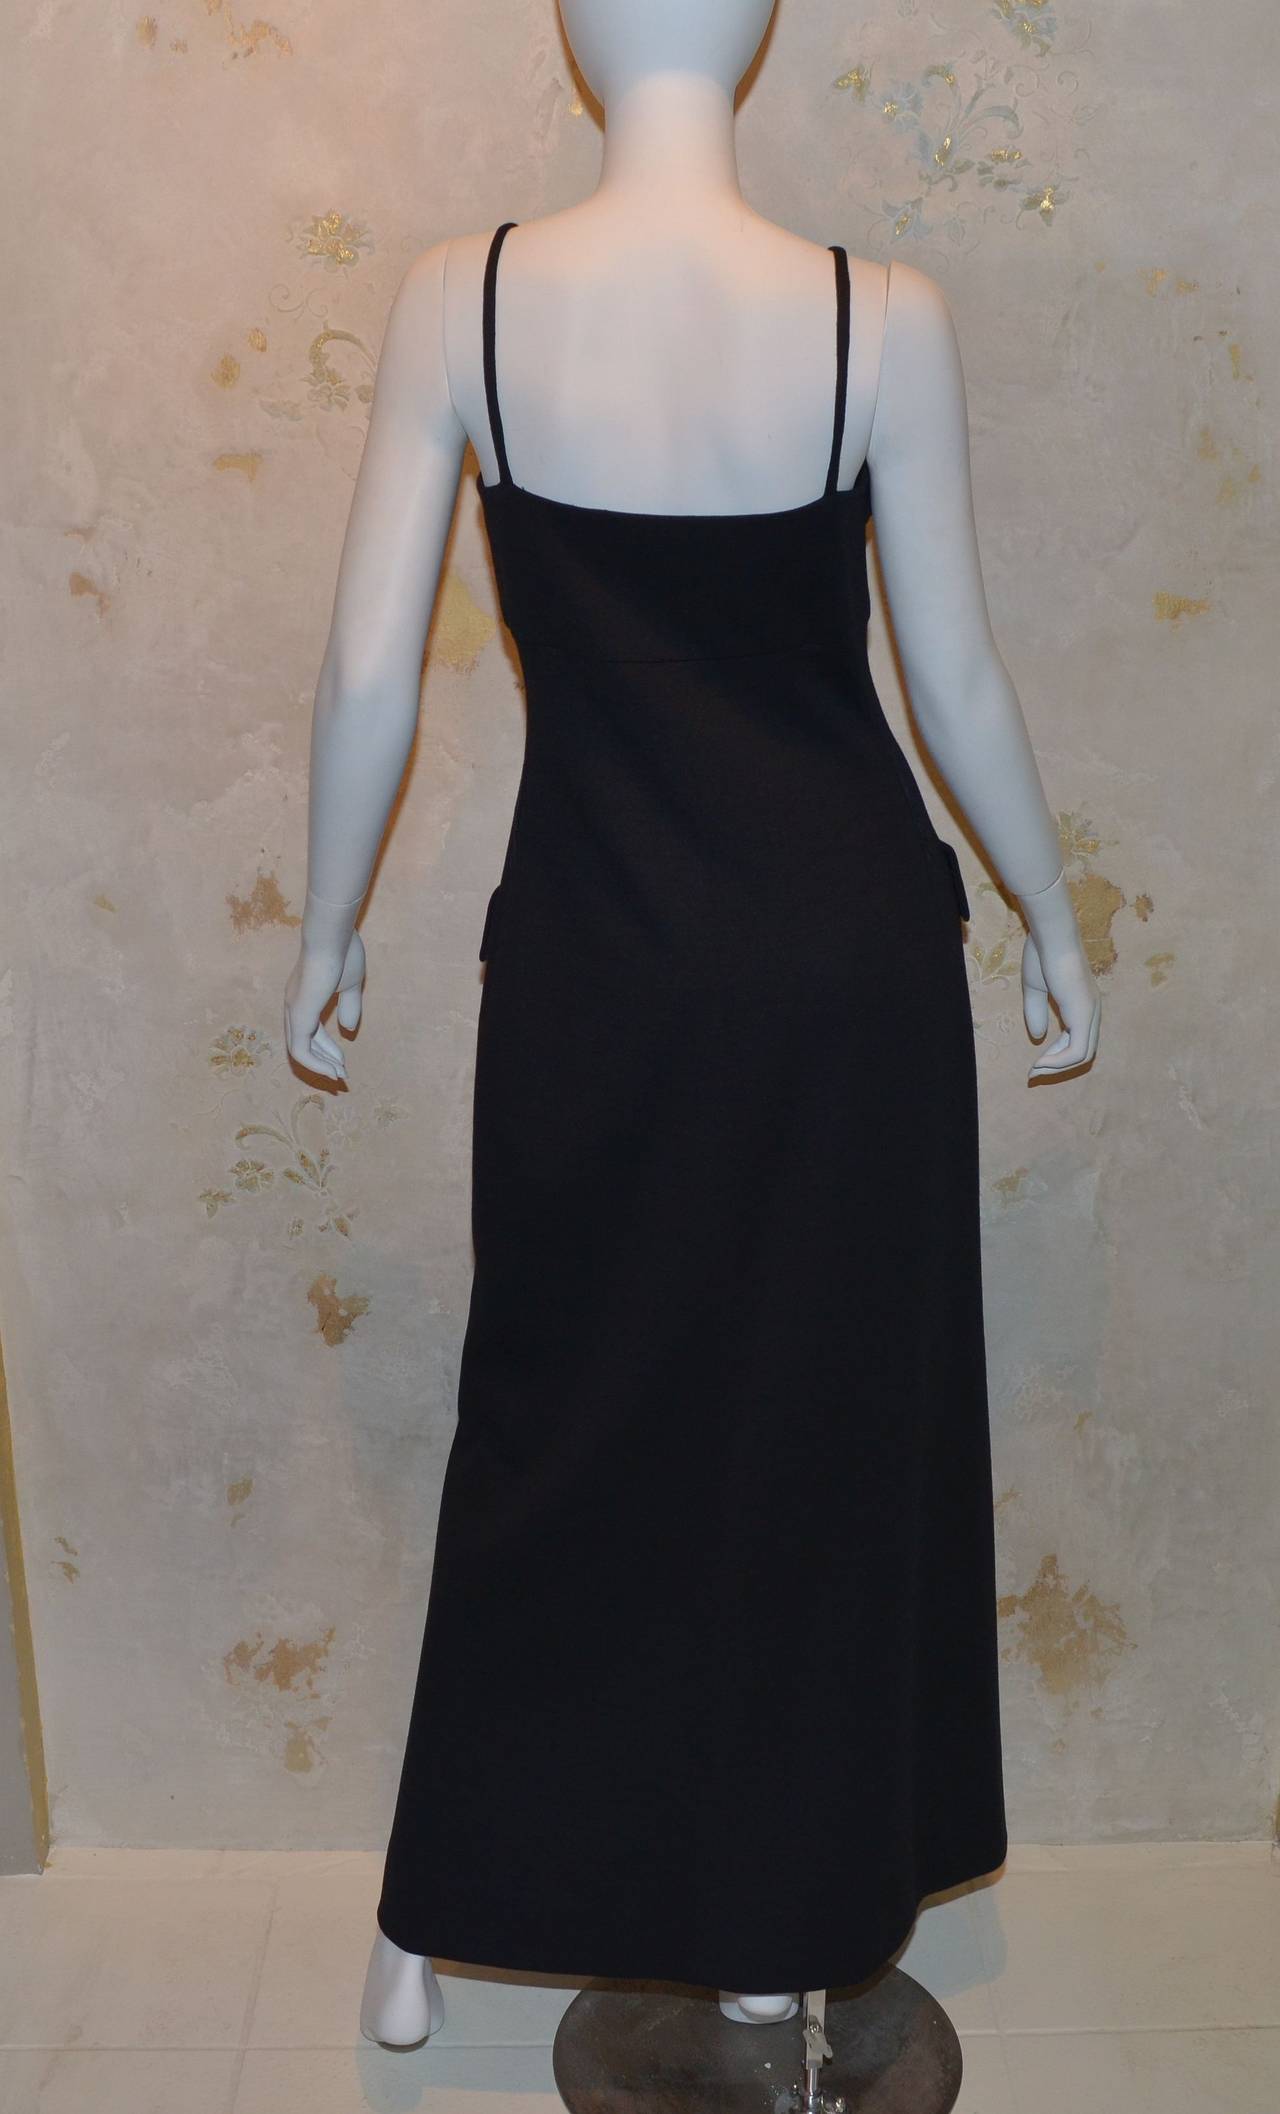 Geoffrey Beene Boutique 1970's double knit dress with exaggerated patch pockets. Buttons down front with large black buttons to the mid thigh. Open slit where buttons end. Dress is fully lined, expert tailoring, elegant in its simplicity. Marked a